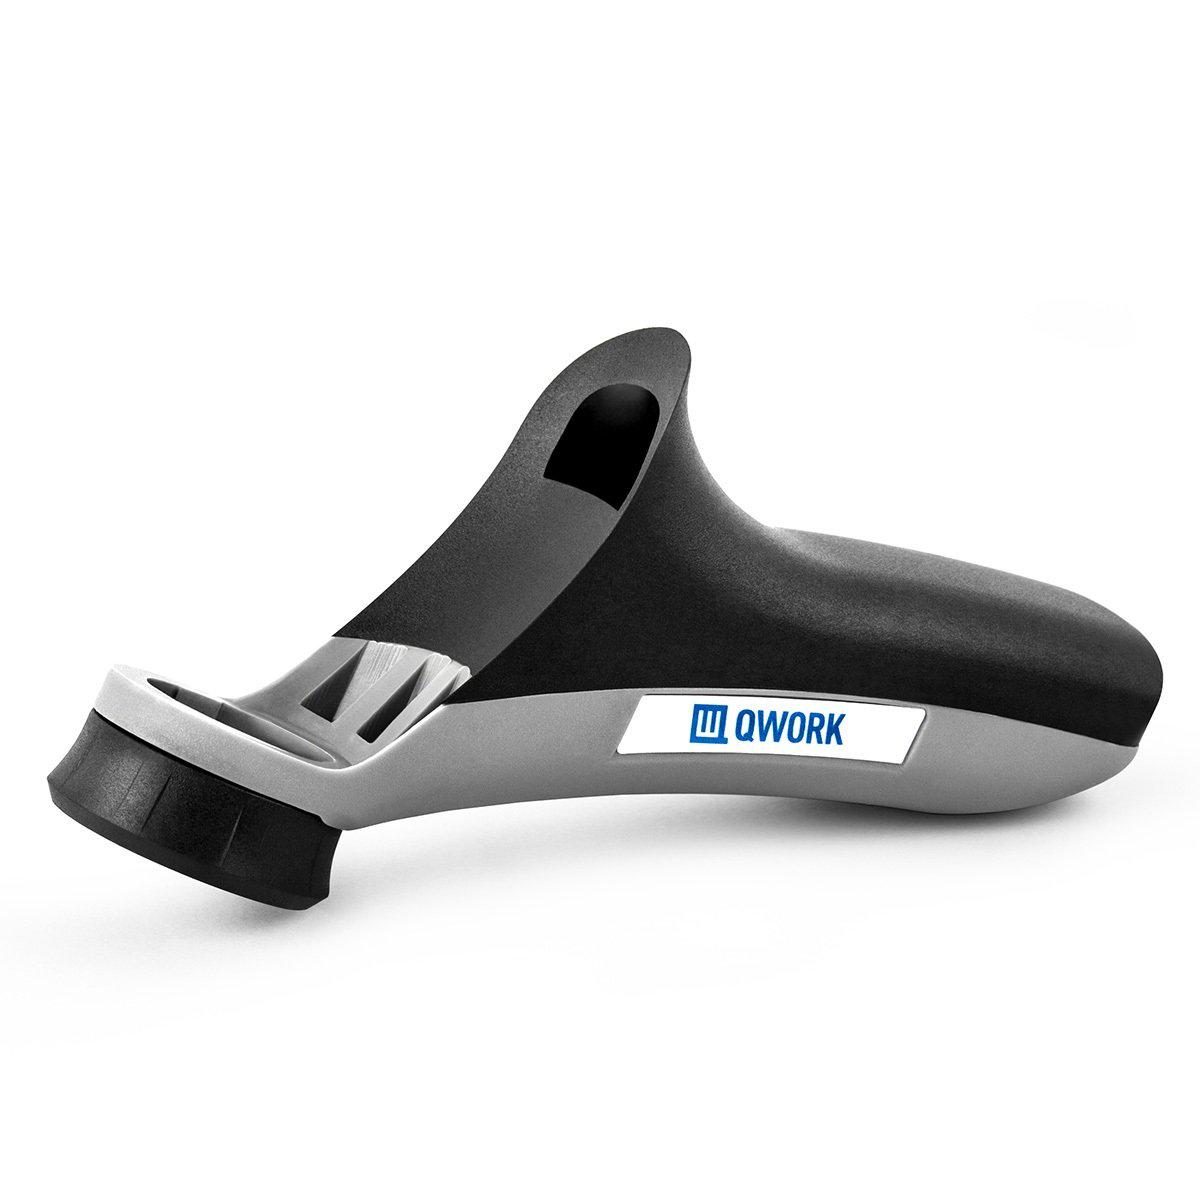 qwork rotary tool handle a577 detailers grip attachment for dremel model 4000, 400, 398, 395, 300, 285, 275, 200, 100, 8200, 